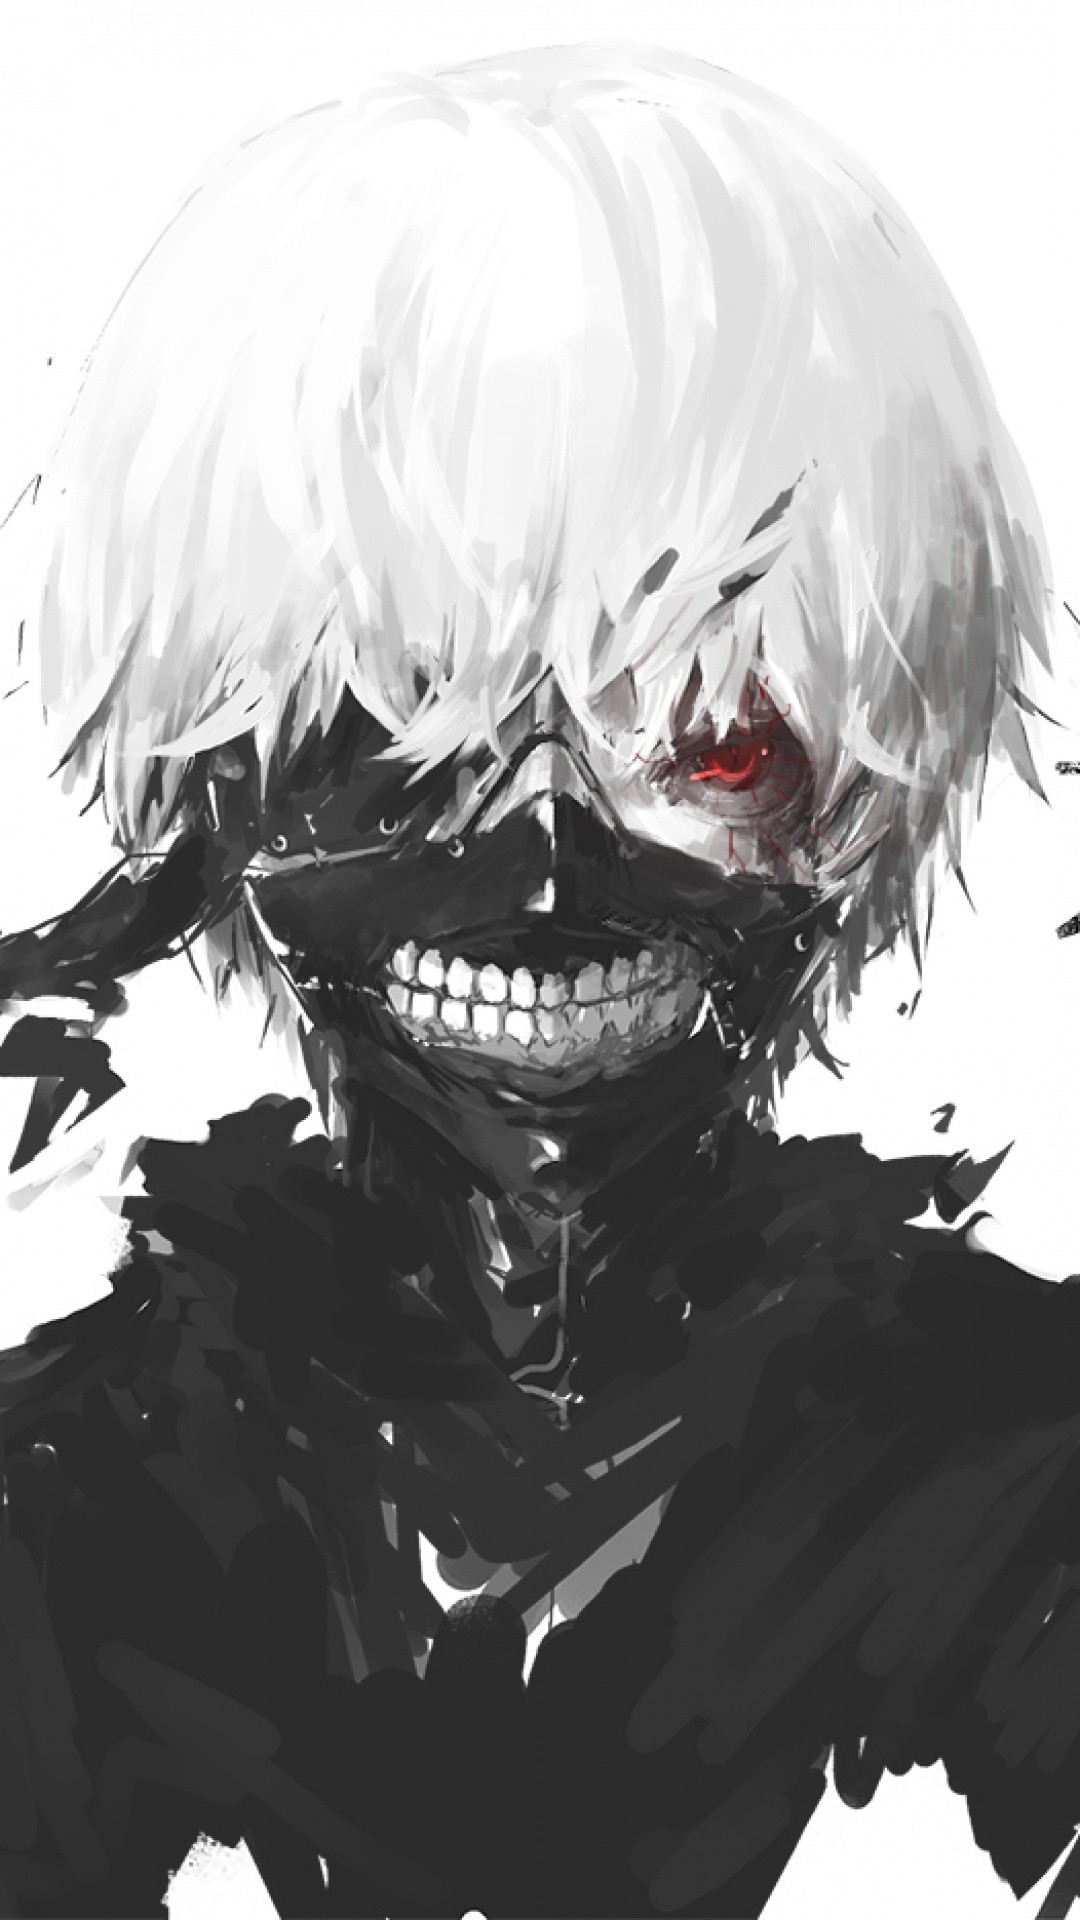 1080x1920 mobile_phone_wallpaper_45586_tokyo_ghoul-by-mero_dnt